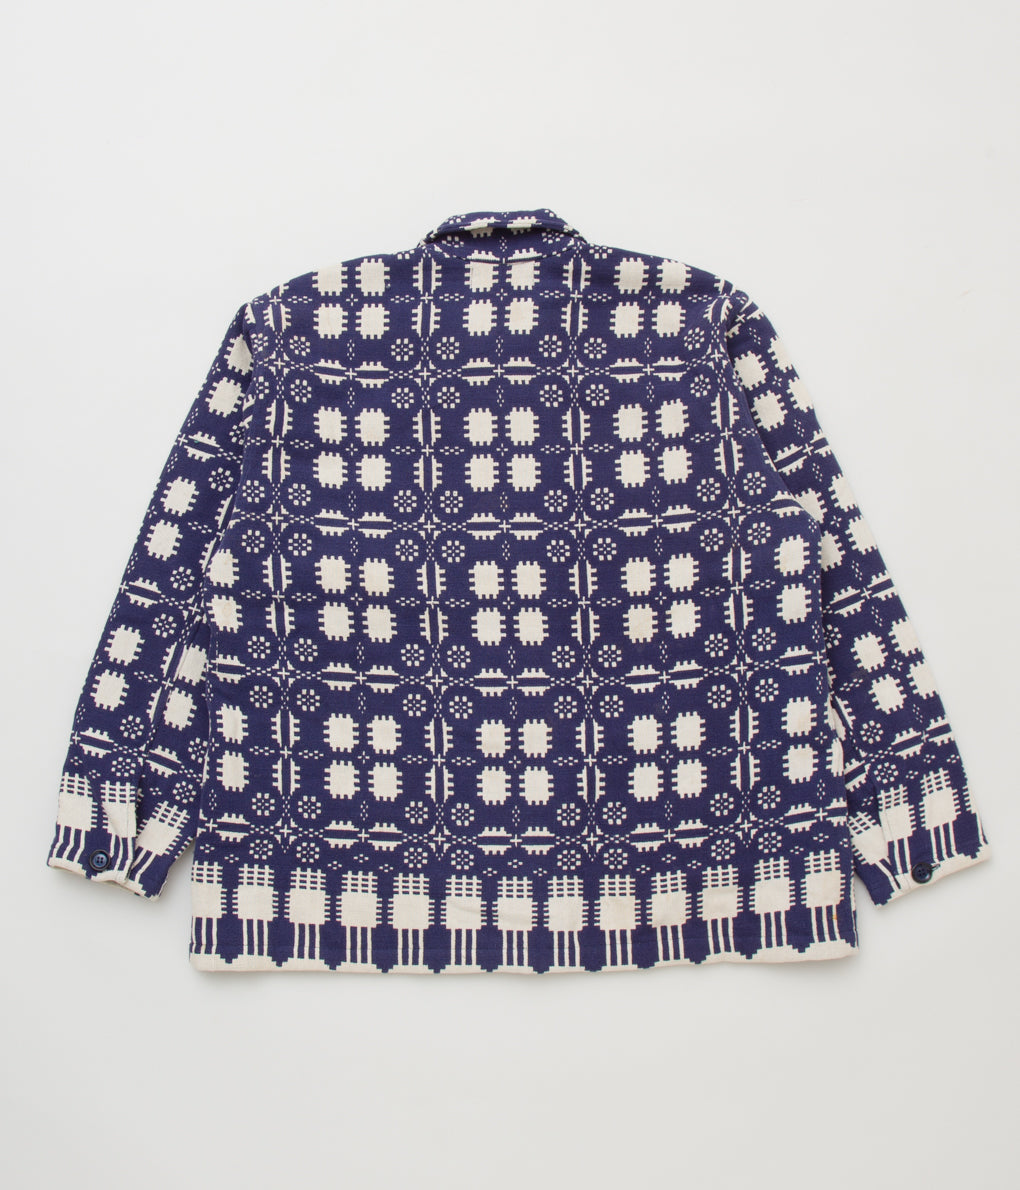 FAREWELL FRANCES "WOOL COVERLET CLAUDE COAT"(NAVY COVERLET  A)